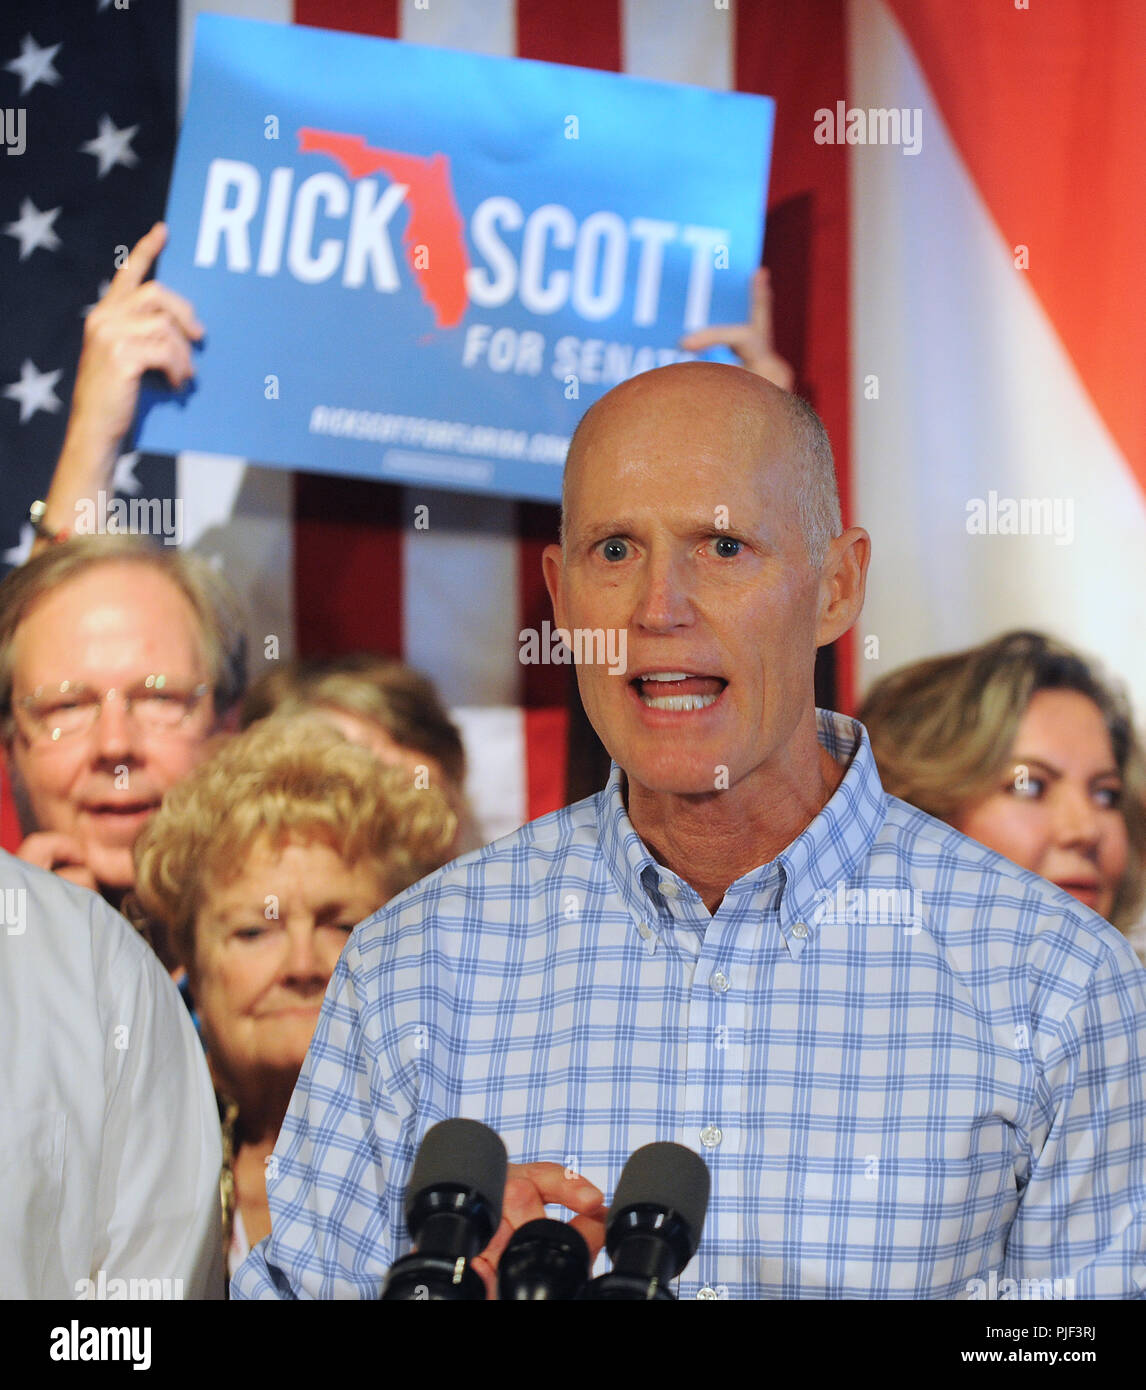 Orlando, Florida, USA. September 6, 2018 - Orlando, Florida, United States -  Florida Governor Rick Scott, Republican nominee for the U.S. Senate, addresses supporters at a Republican unity rally on September 6, 2018 at the Ace Cafe in Orlando, Florida. Scott is hoping to unseat Democratic U.S. Senator Bill Nelson. (Paul Hennessy/Alamy) Credit: Paul Hennessy/Alamy Live News Stock Photo